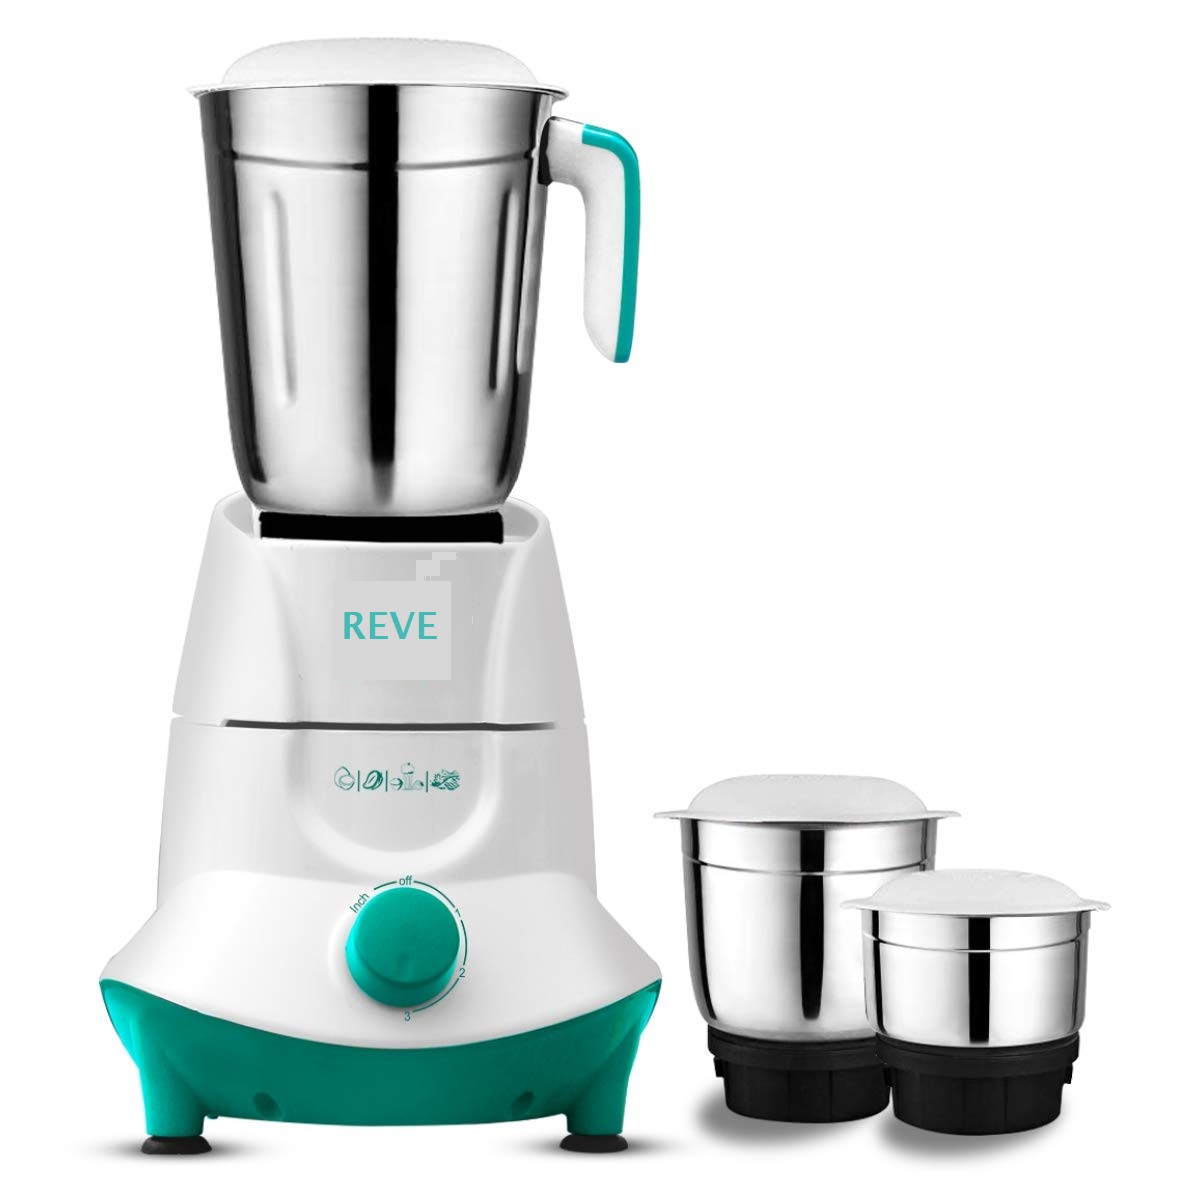 REVE Mixer Grinder - 550W with 3 Stainless Steel Jars ( White/Green )